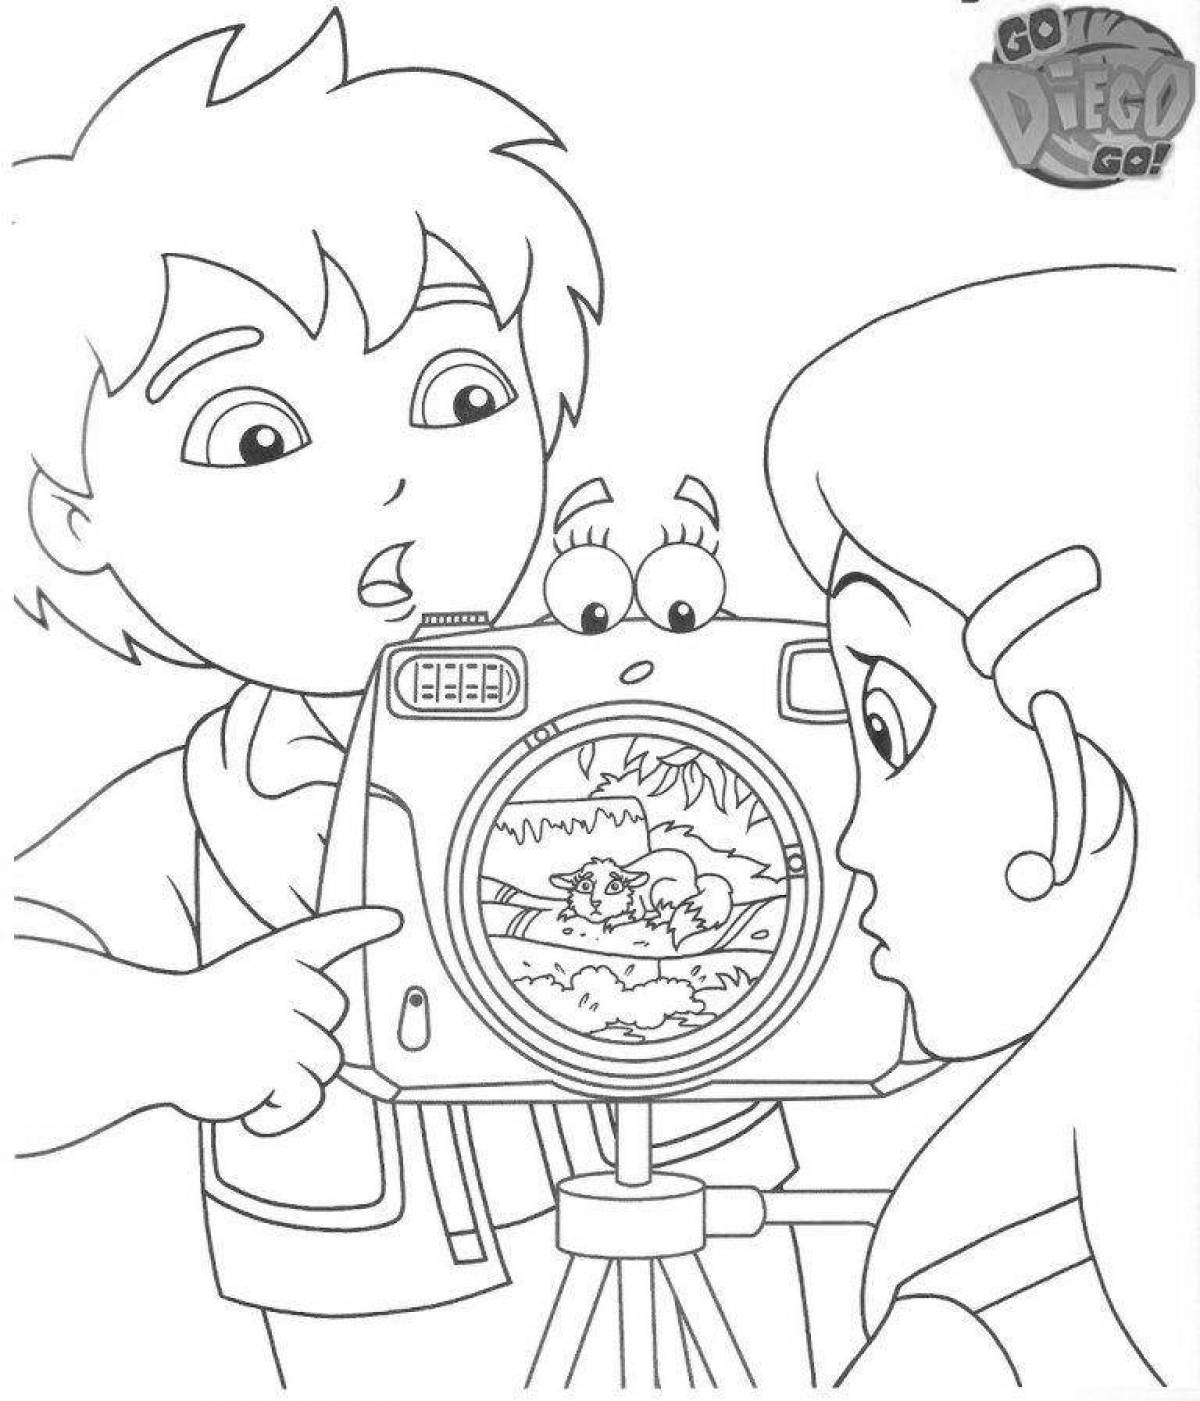 Diego Go's adorable coloring page